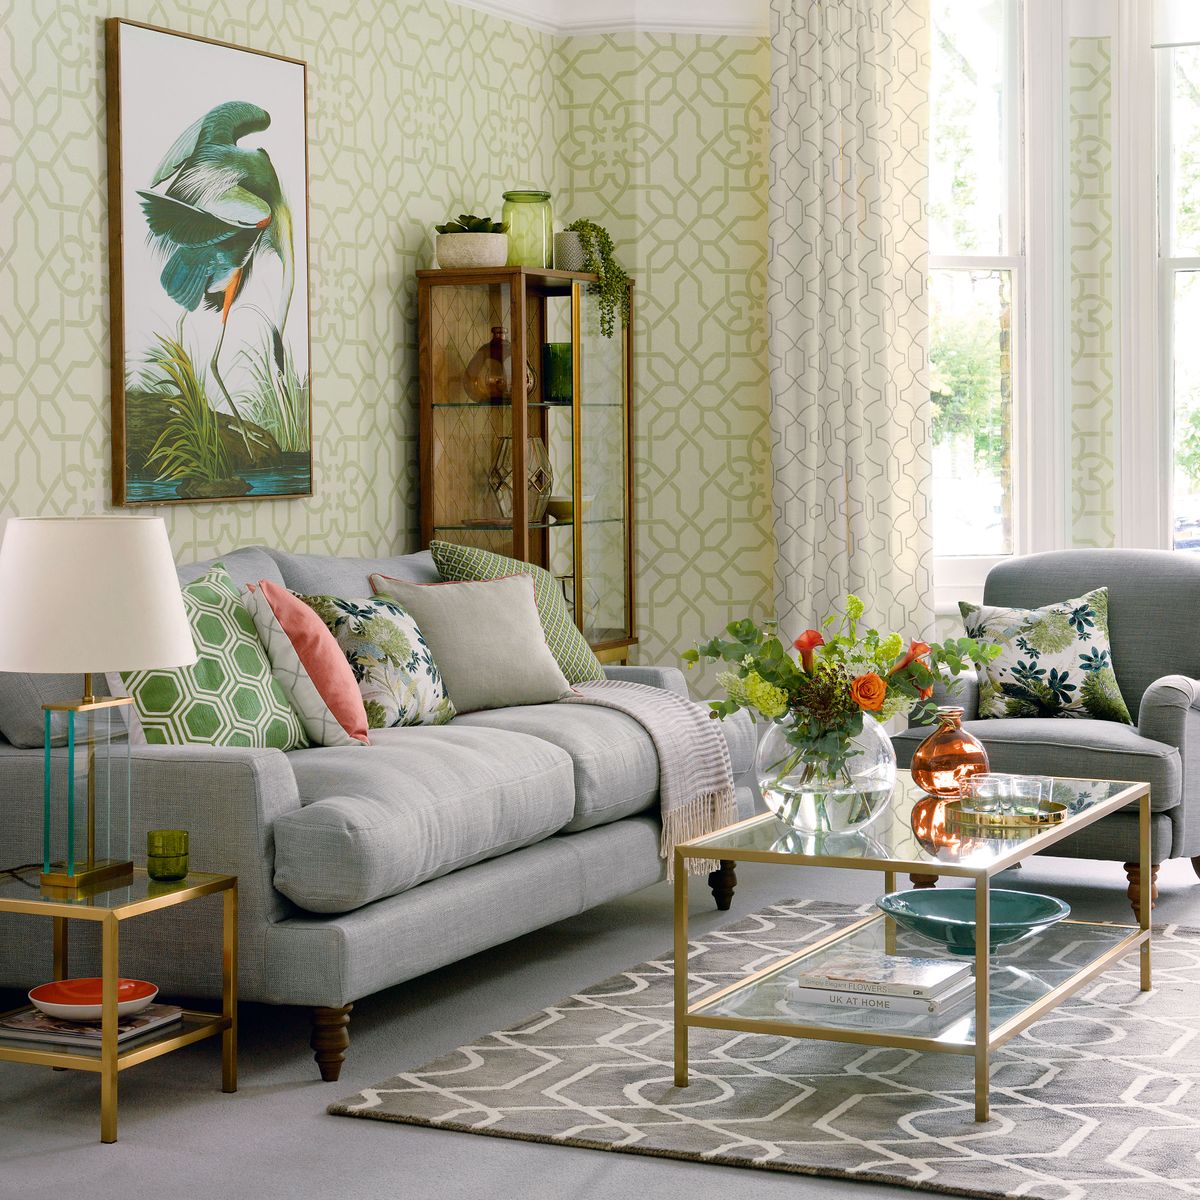 10 green and grey living room ideas for a smart space